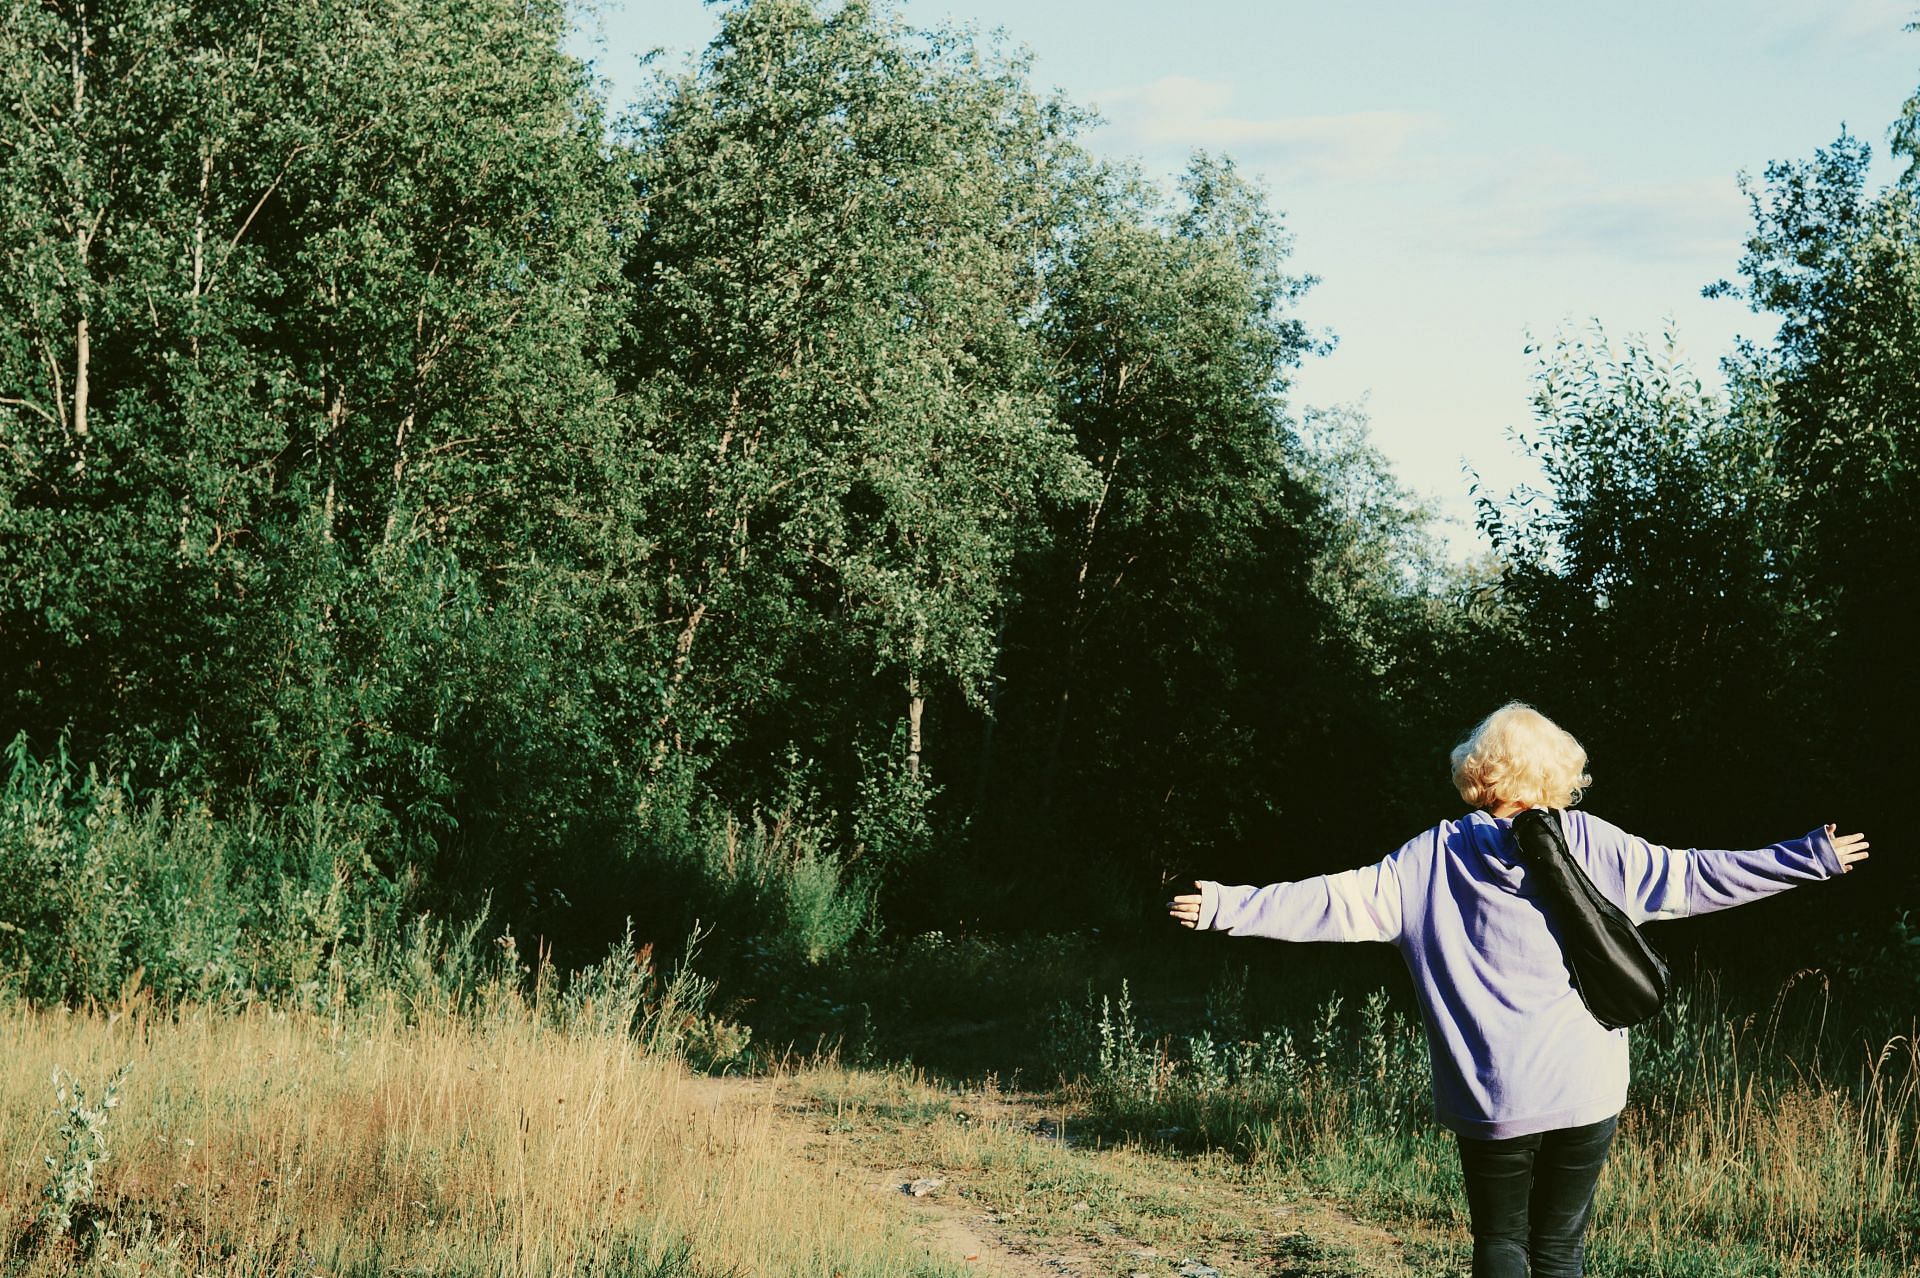 Long walks in nature relieves stress and anxiety (Image by Anastasia Golubeva / Pexels)